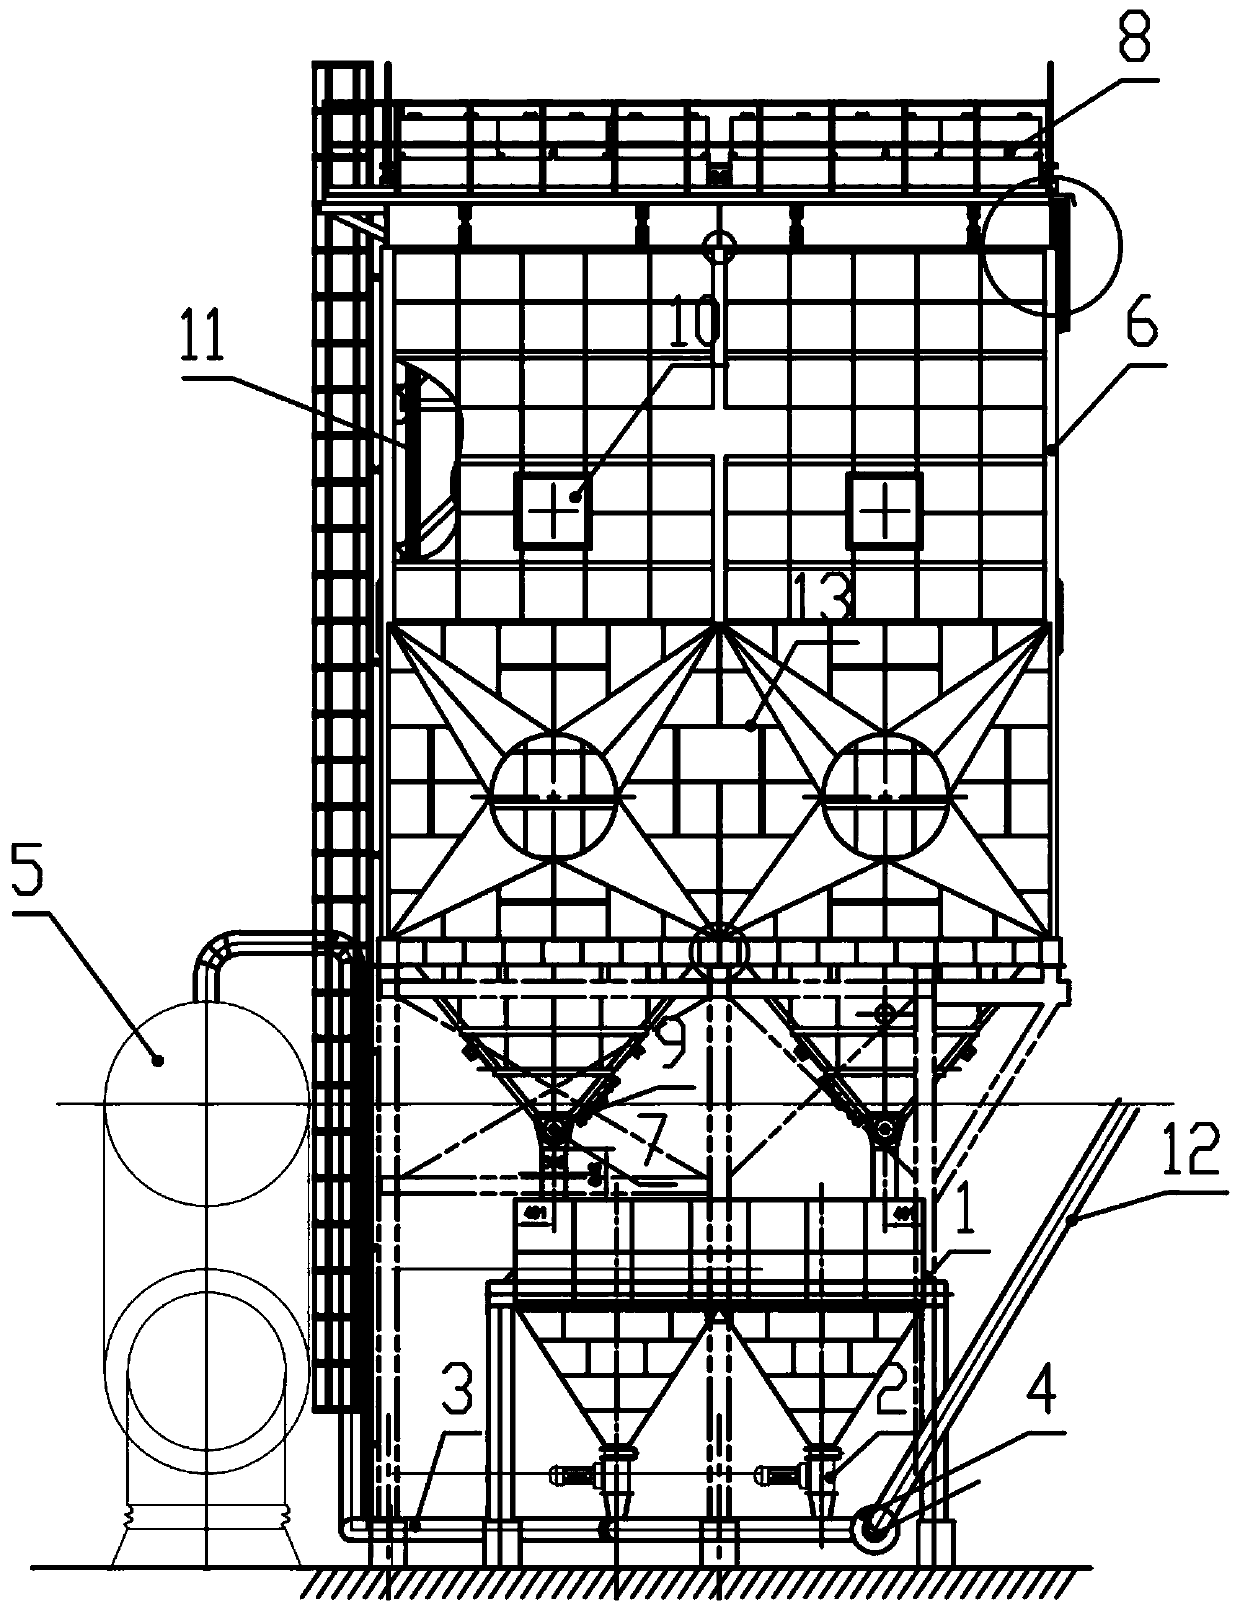 Flue gas purification and adsorption device before desulfurization and denitrification